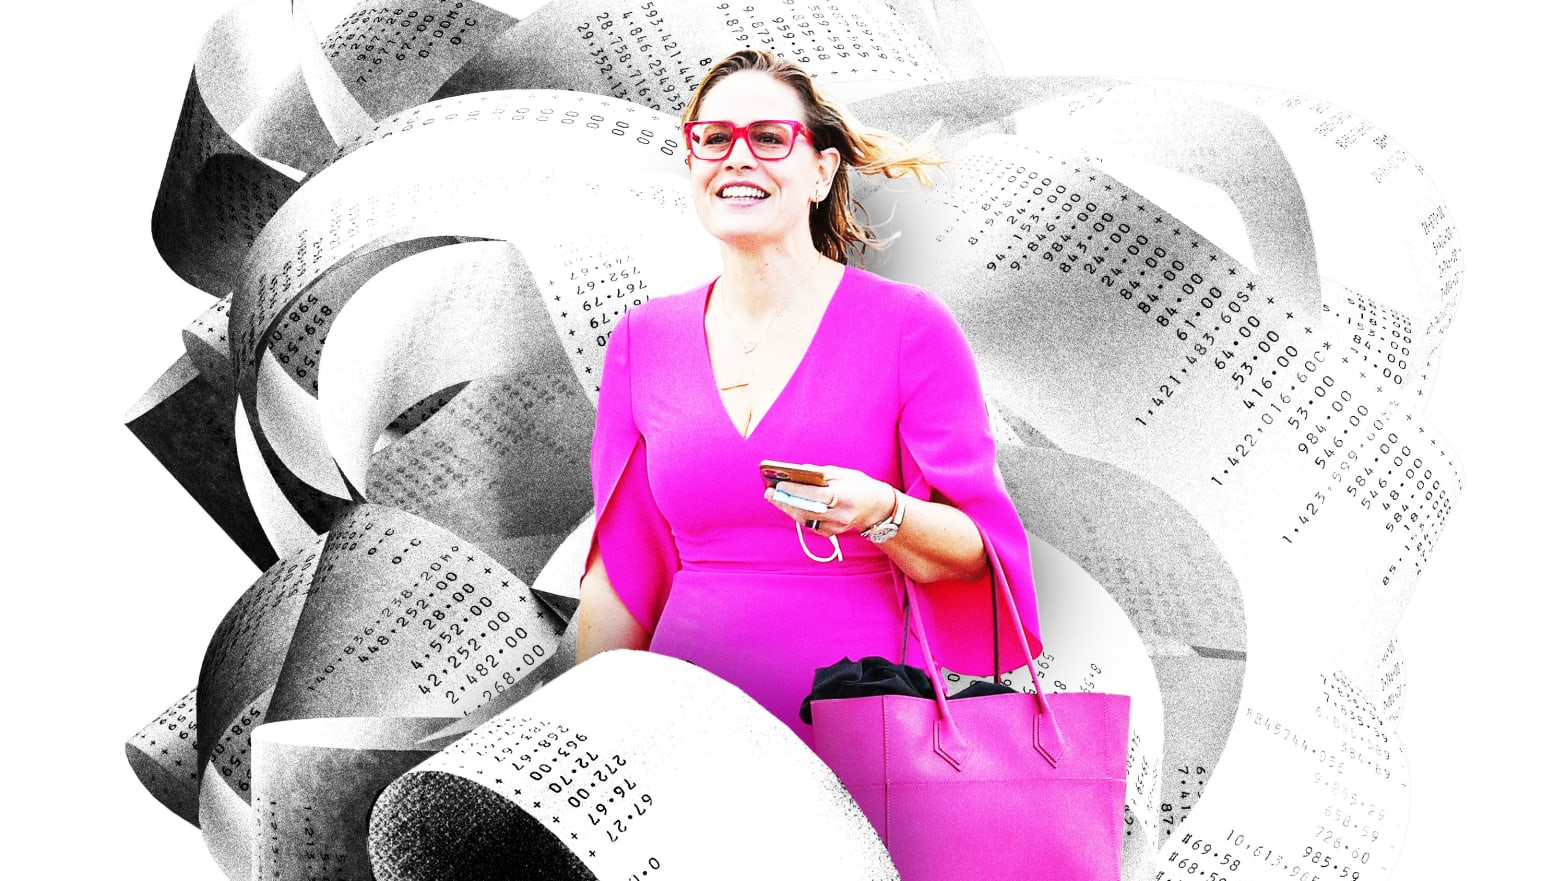 A photo illustration of Kyrsten Sinema in a big pile of receipts